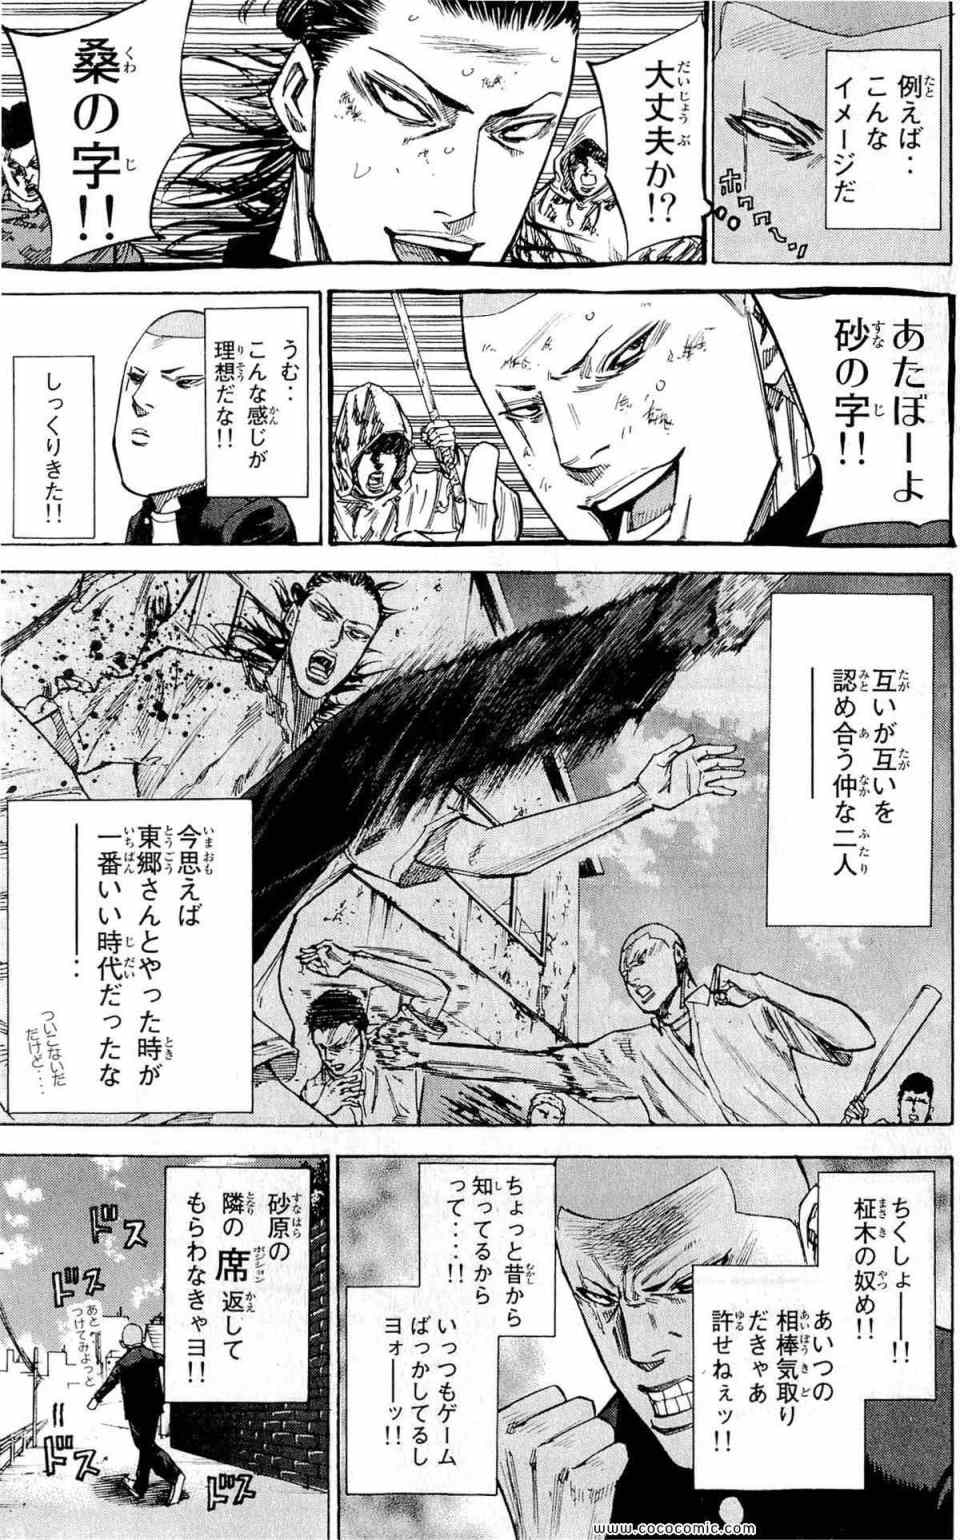 《A-BOUT!(日文)》漫画 A-BOUT! 08卷